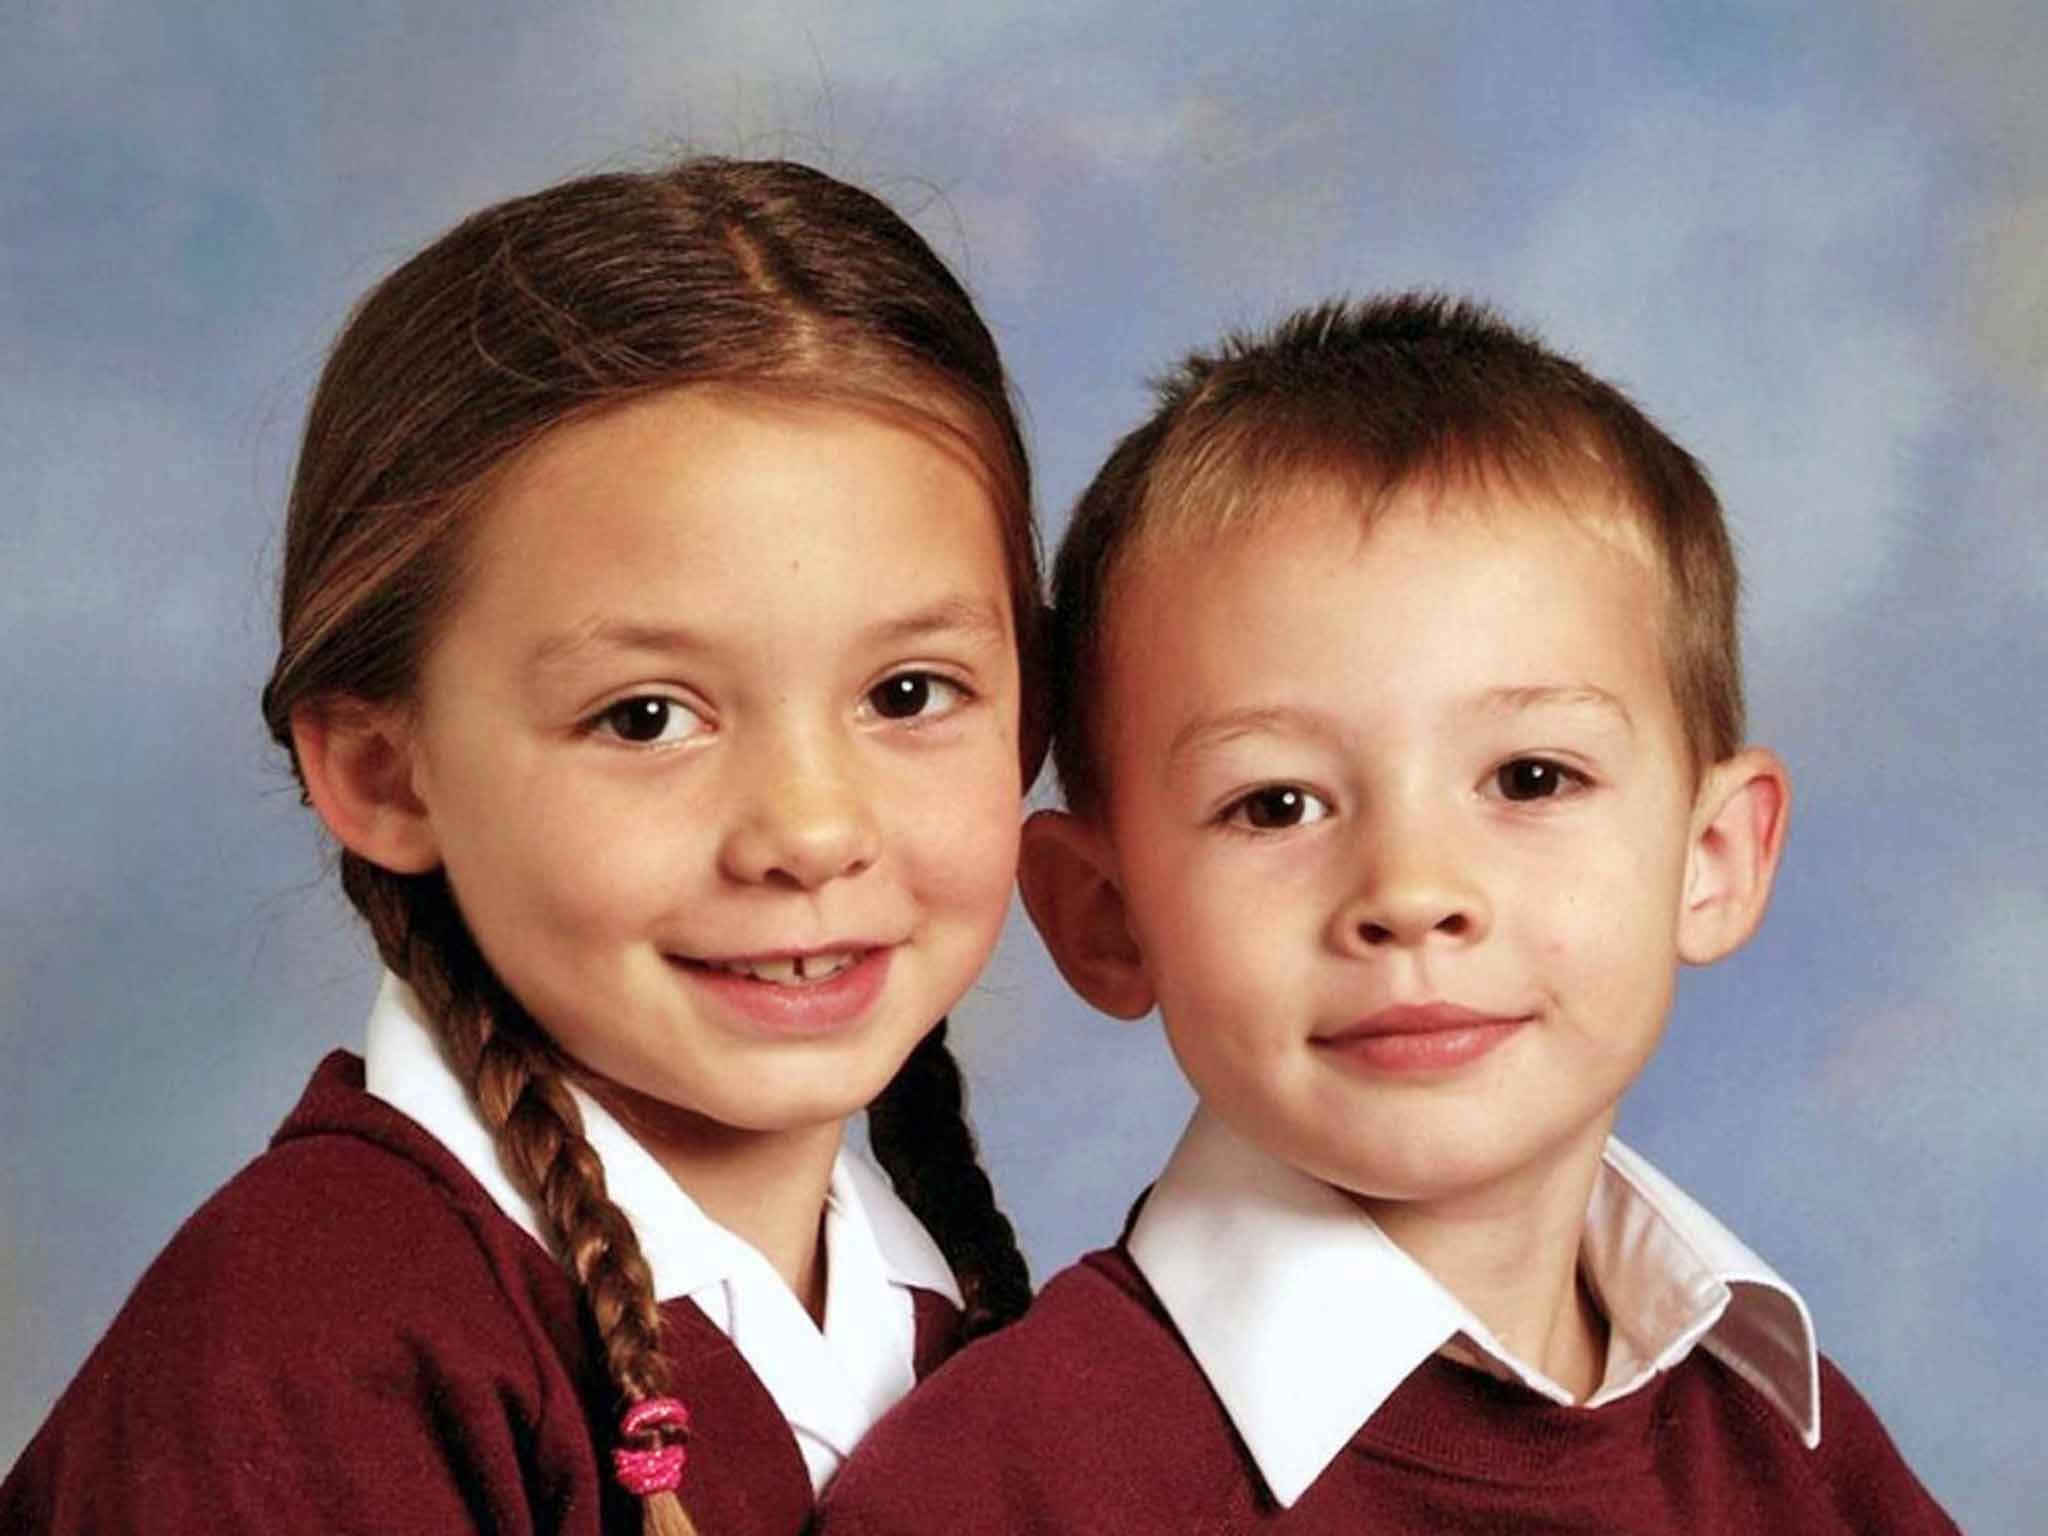 Christianne and Robert Shepherd, who died from carbon monoxide poisoning while they were on holiday in Corfu with their father and his partner in 2006